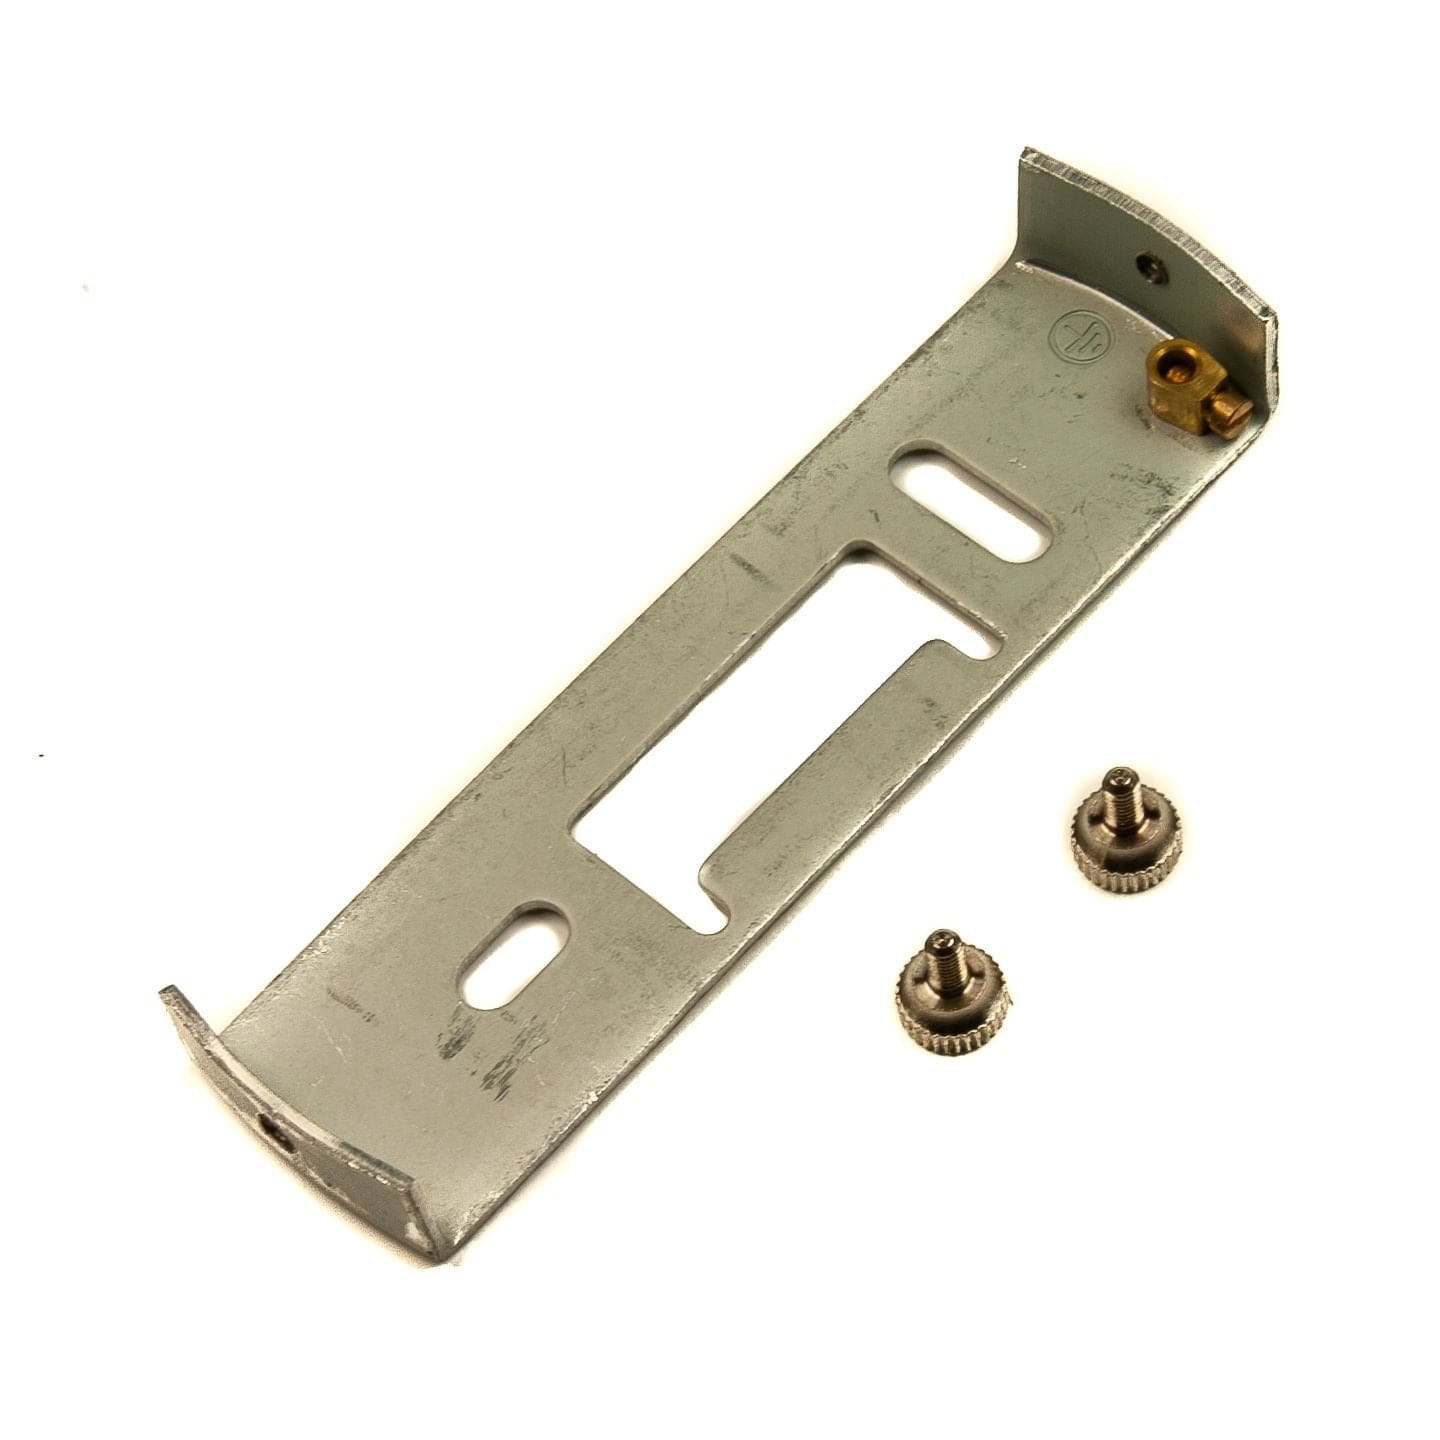 Lighting Fixture Ceiling Plate Bracket Plate Earthed 97mm with Nickel Screws - Thunderfix Hardware